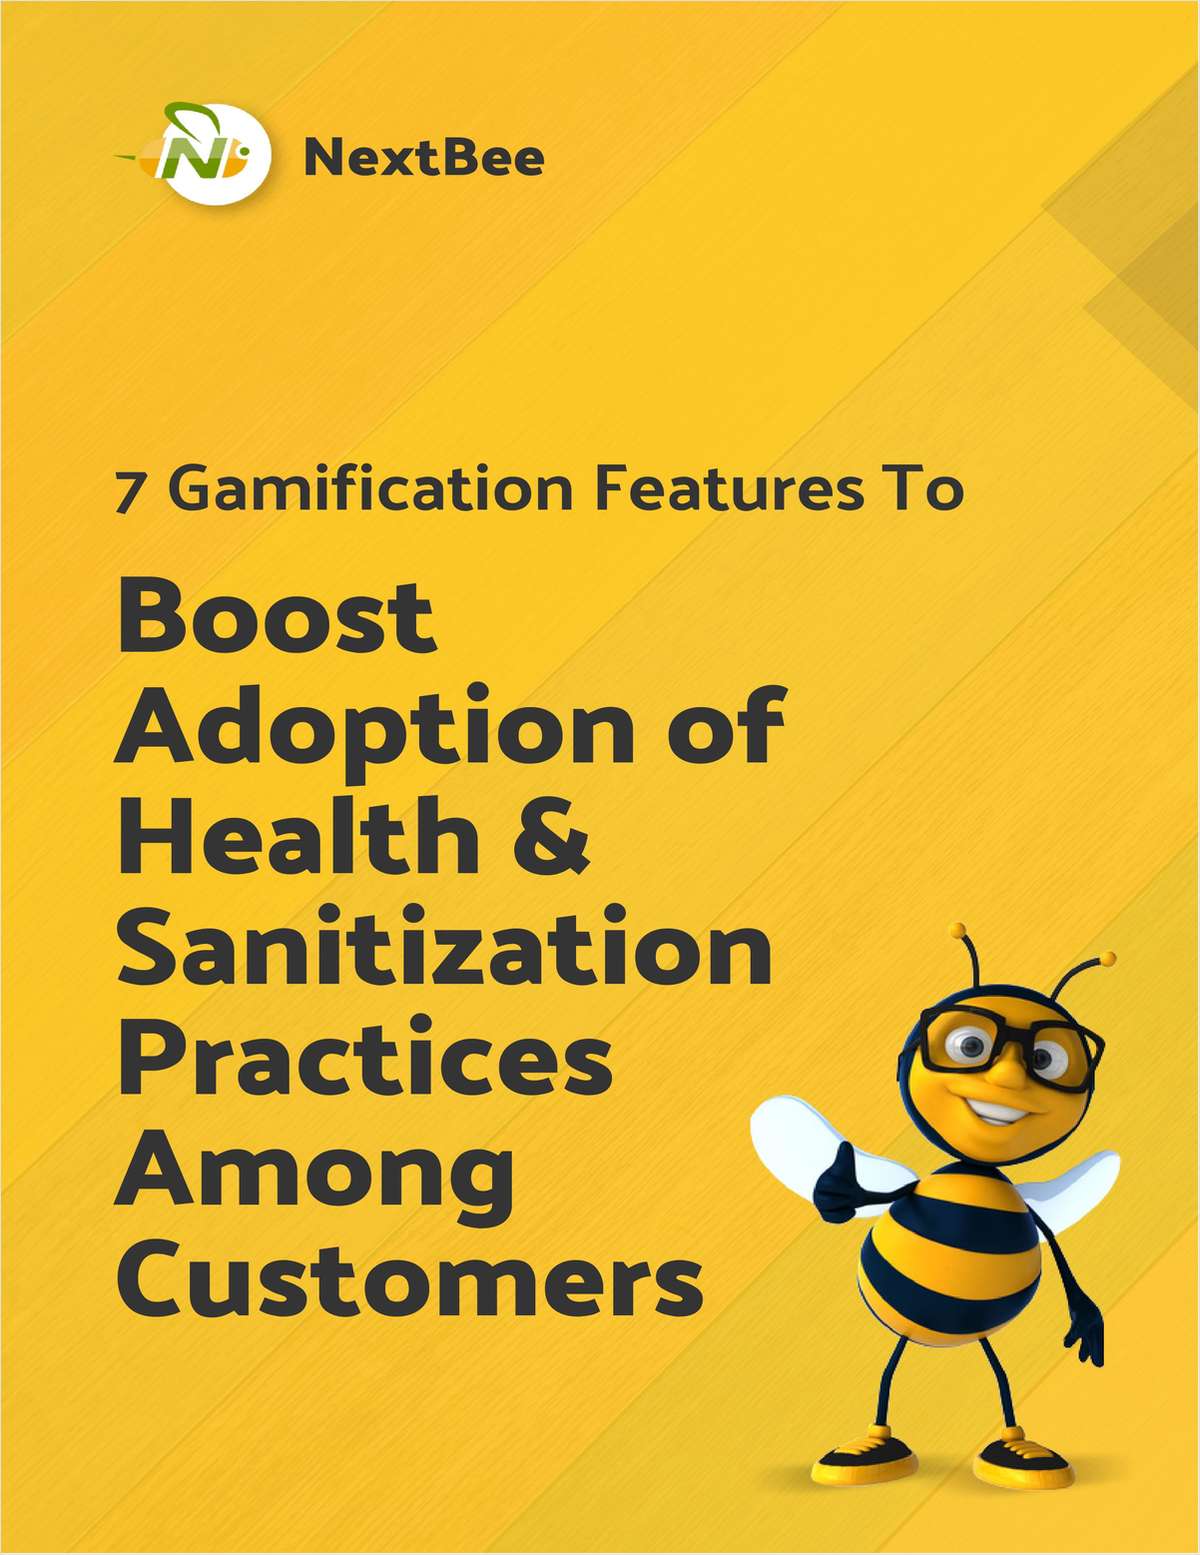 7 Gamification Features To Boost Adoption of Health & Sanitization Practices Among Customers